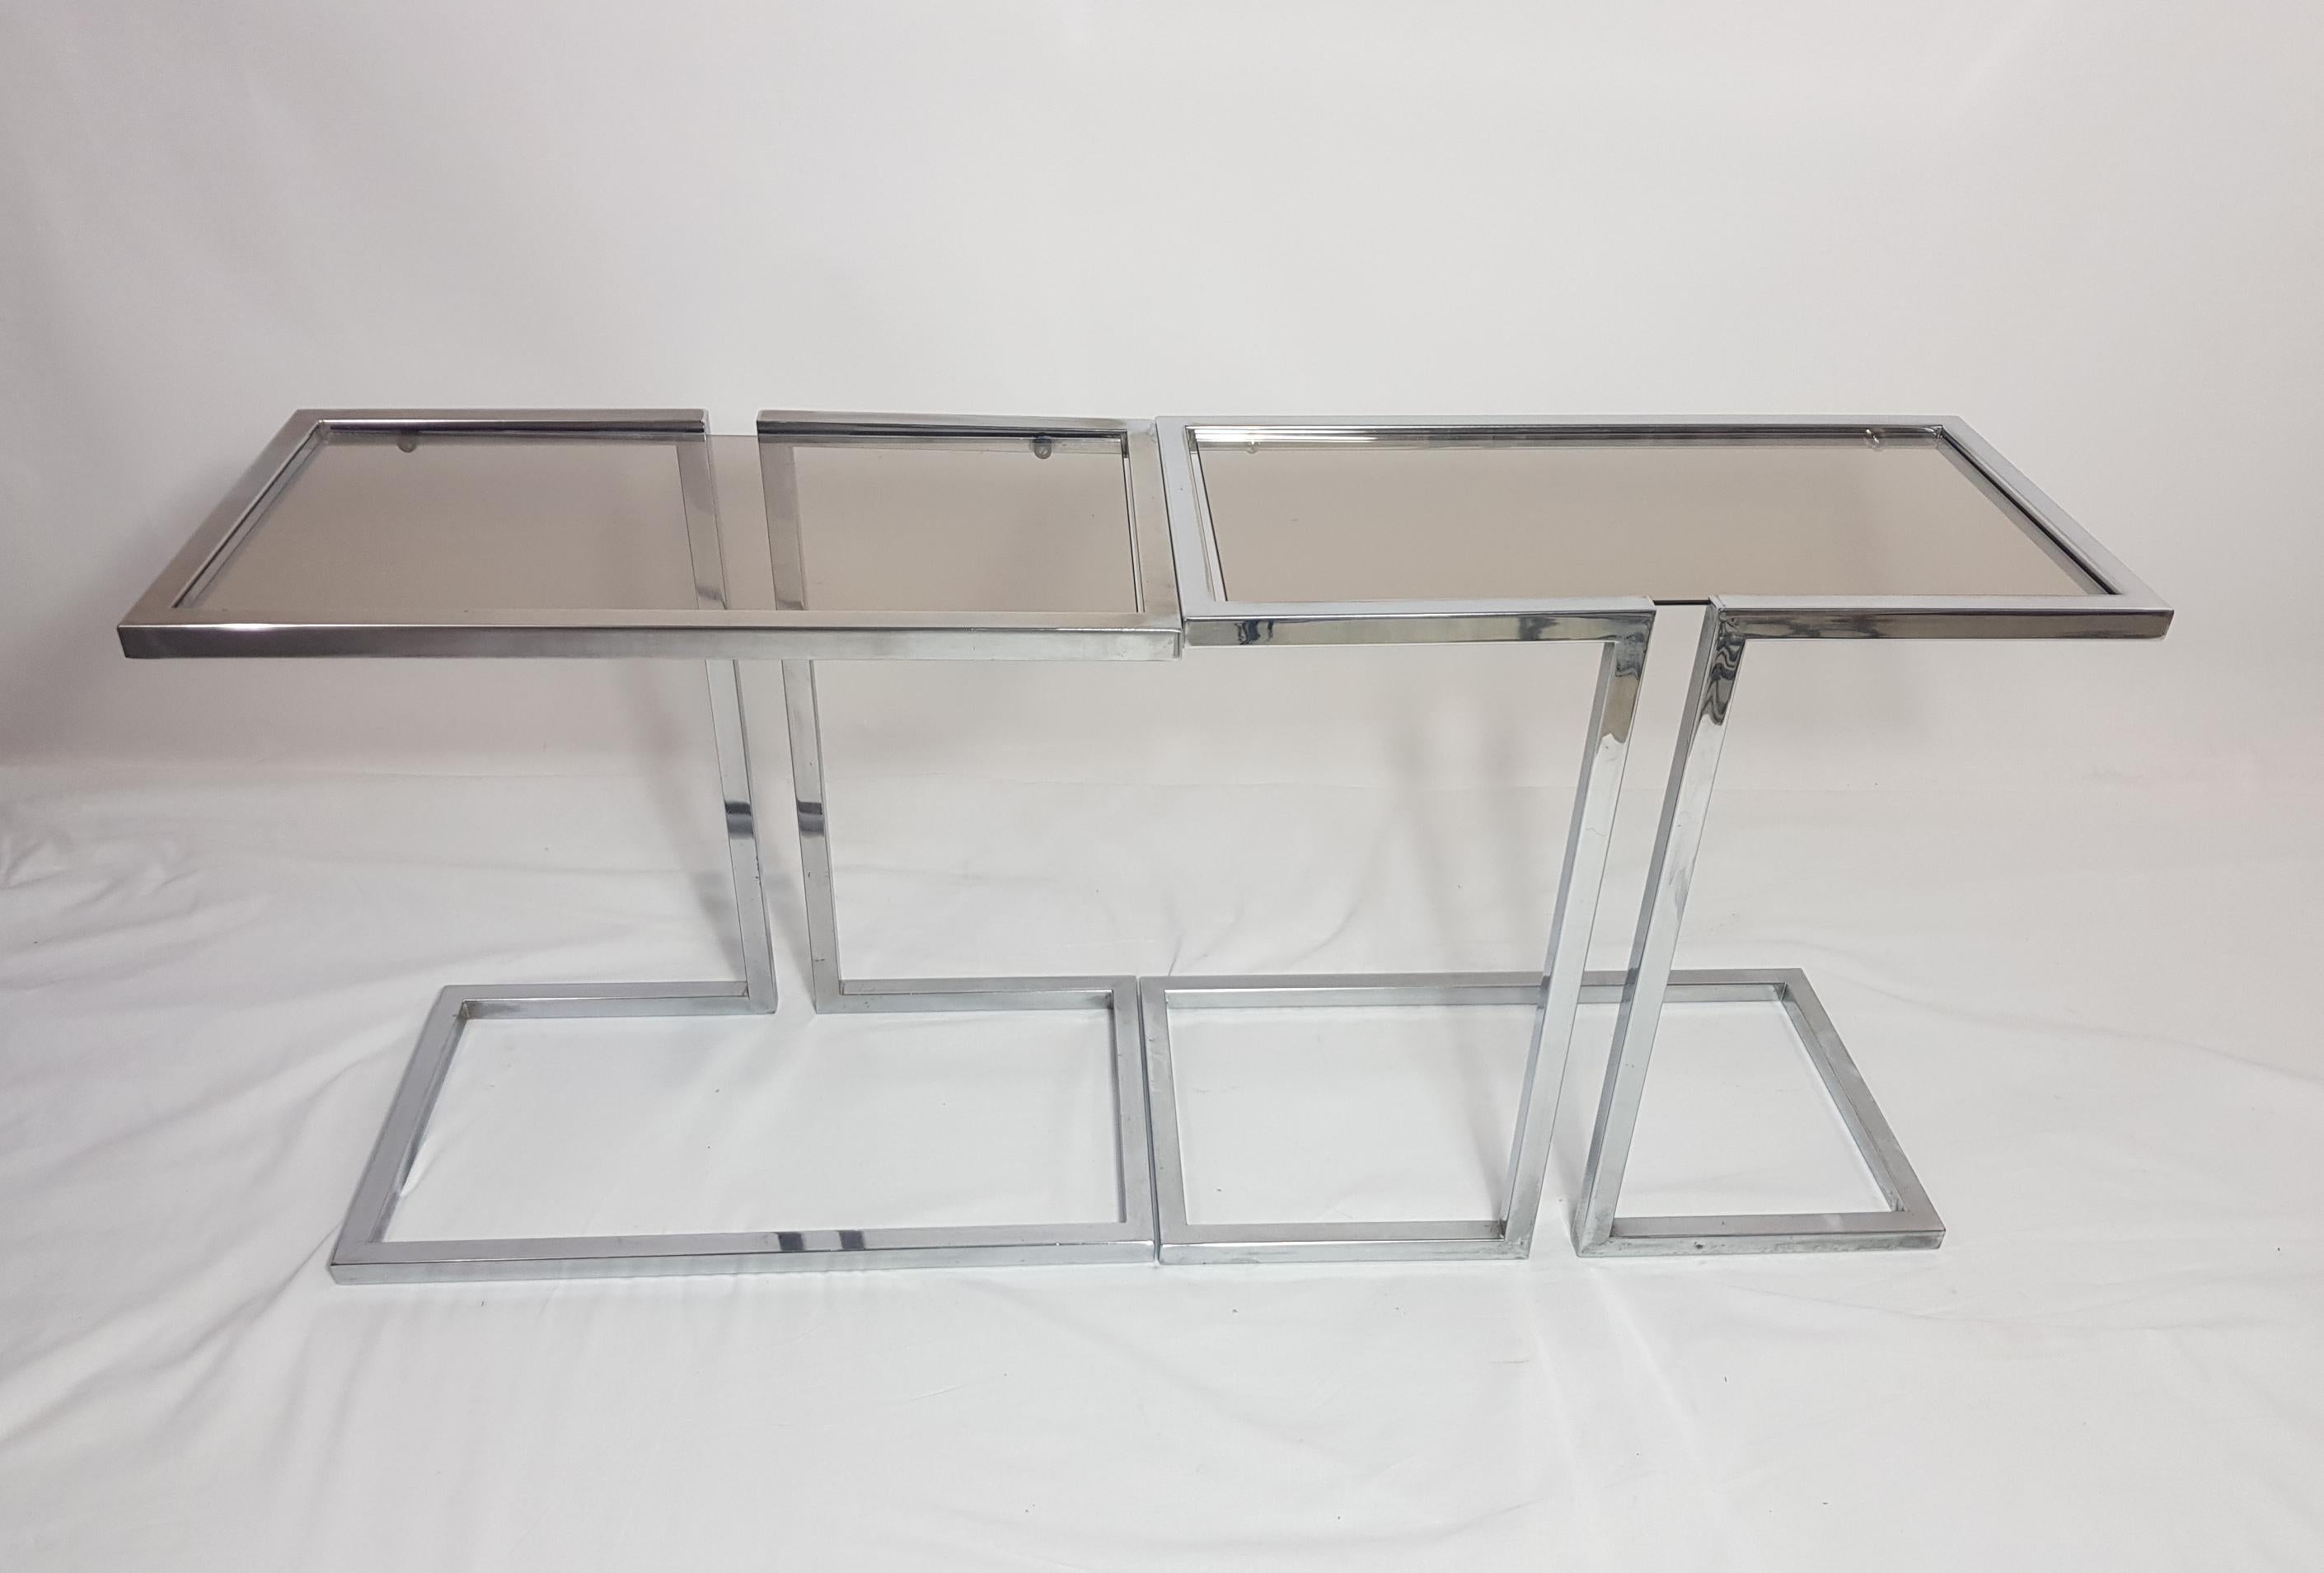 Pair of Chrome and Glass Sofa Side Tables, 1970s For Sale 2